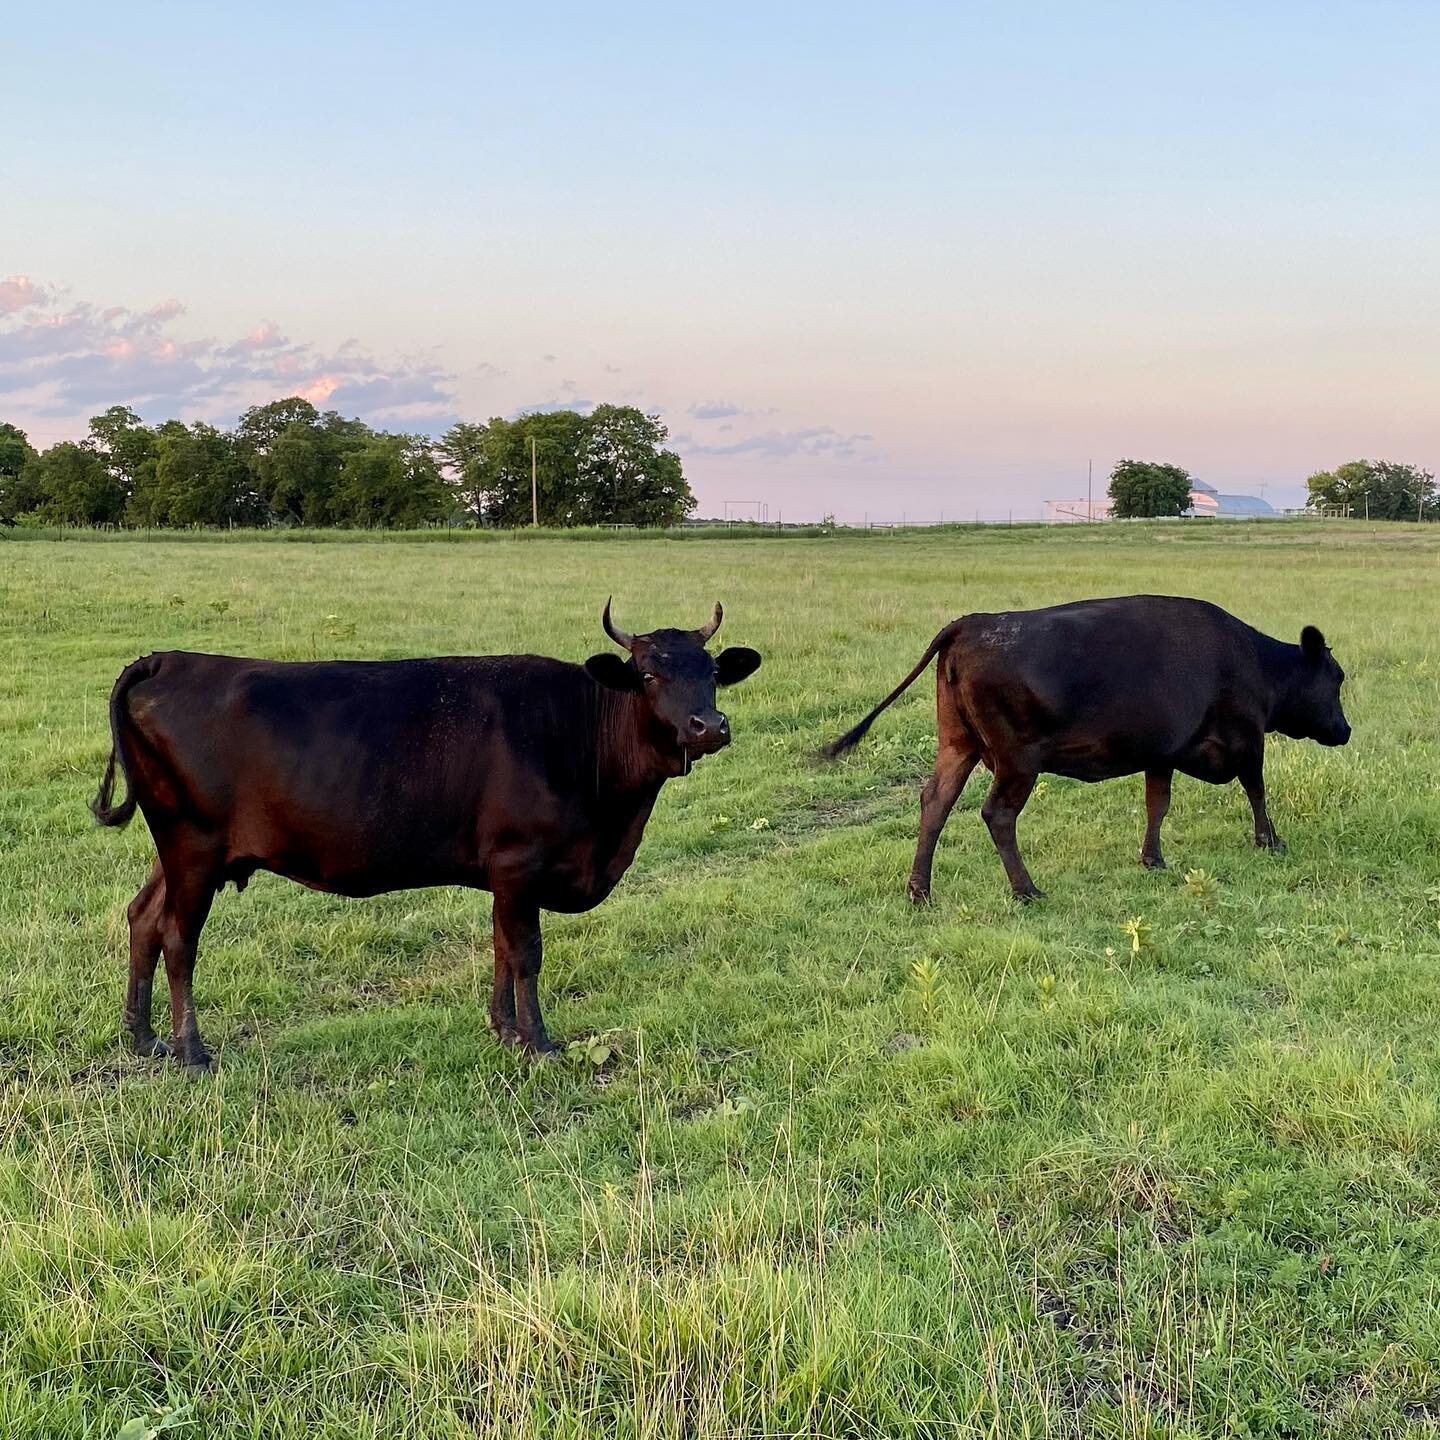 OUR COWS ARE A COMBINATION OF WAGYU AND BLACK ANGUS AND ARE GRASS FED AND GRASS FINISHED.

OUR BEEF IS AGED FOR UP TO 14 DAYS TO ENHANCE FLAVOR. 

PICK UP IS AVAILABLE BY APPOINTMENT ONLY AT THE FARM IN WHITEWRIGHT, TEXAS OR BY PRE-PAYING AND SCHEDUL